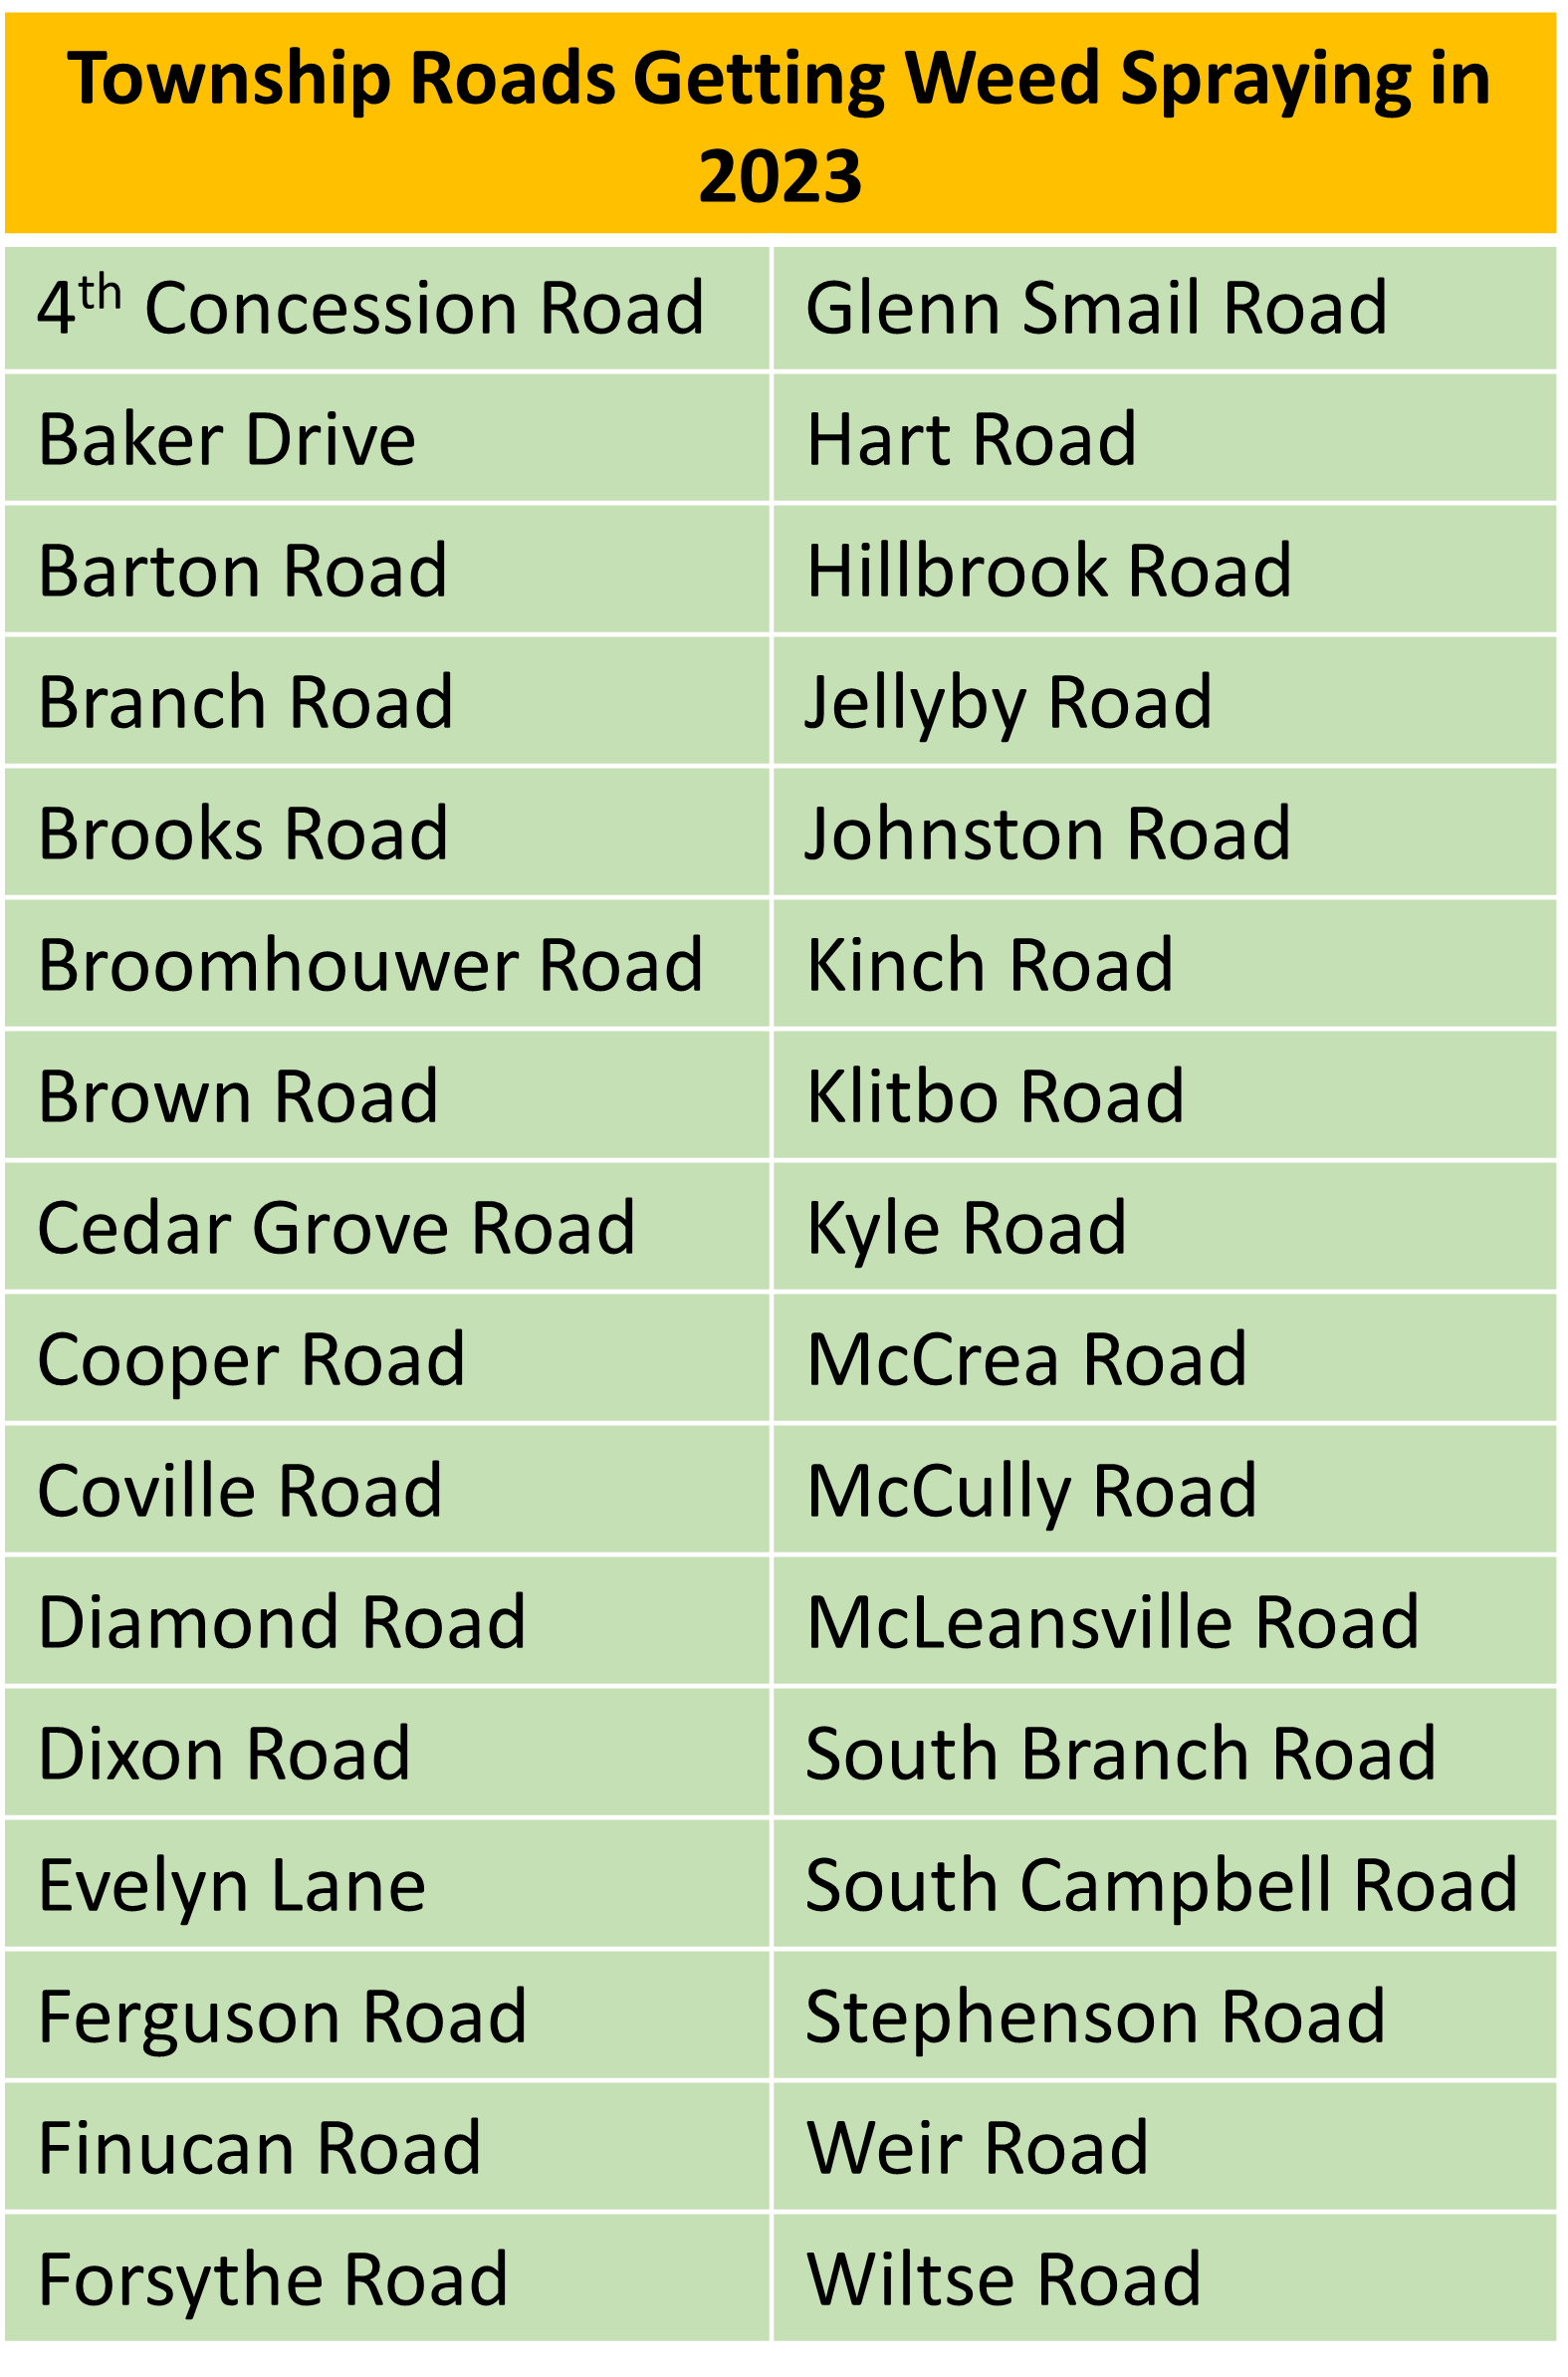 list of township roads getting roadside weed spraying